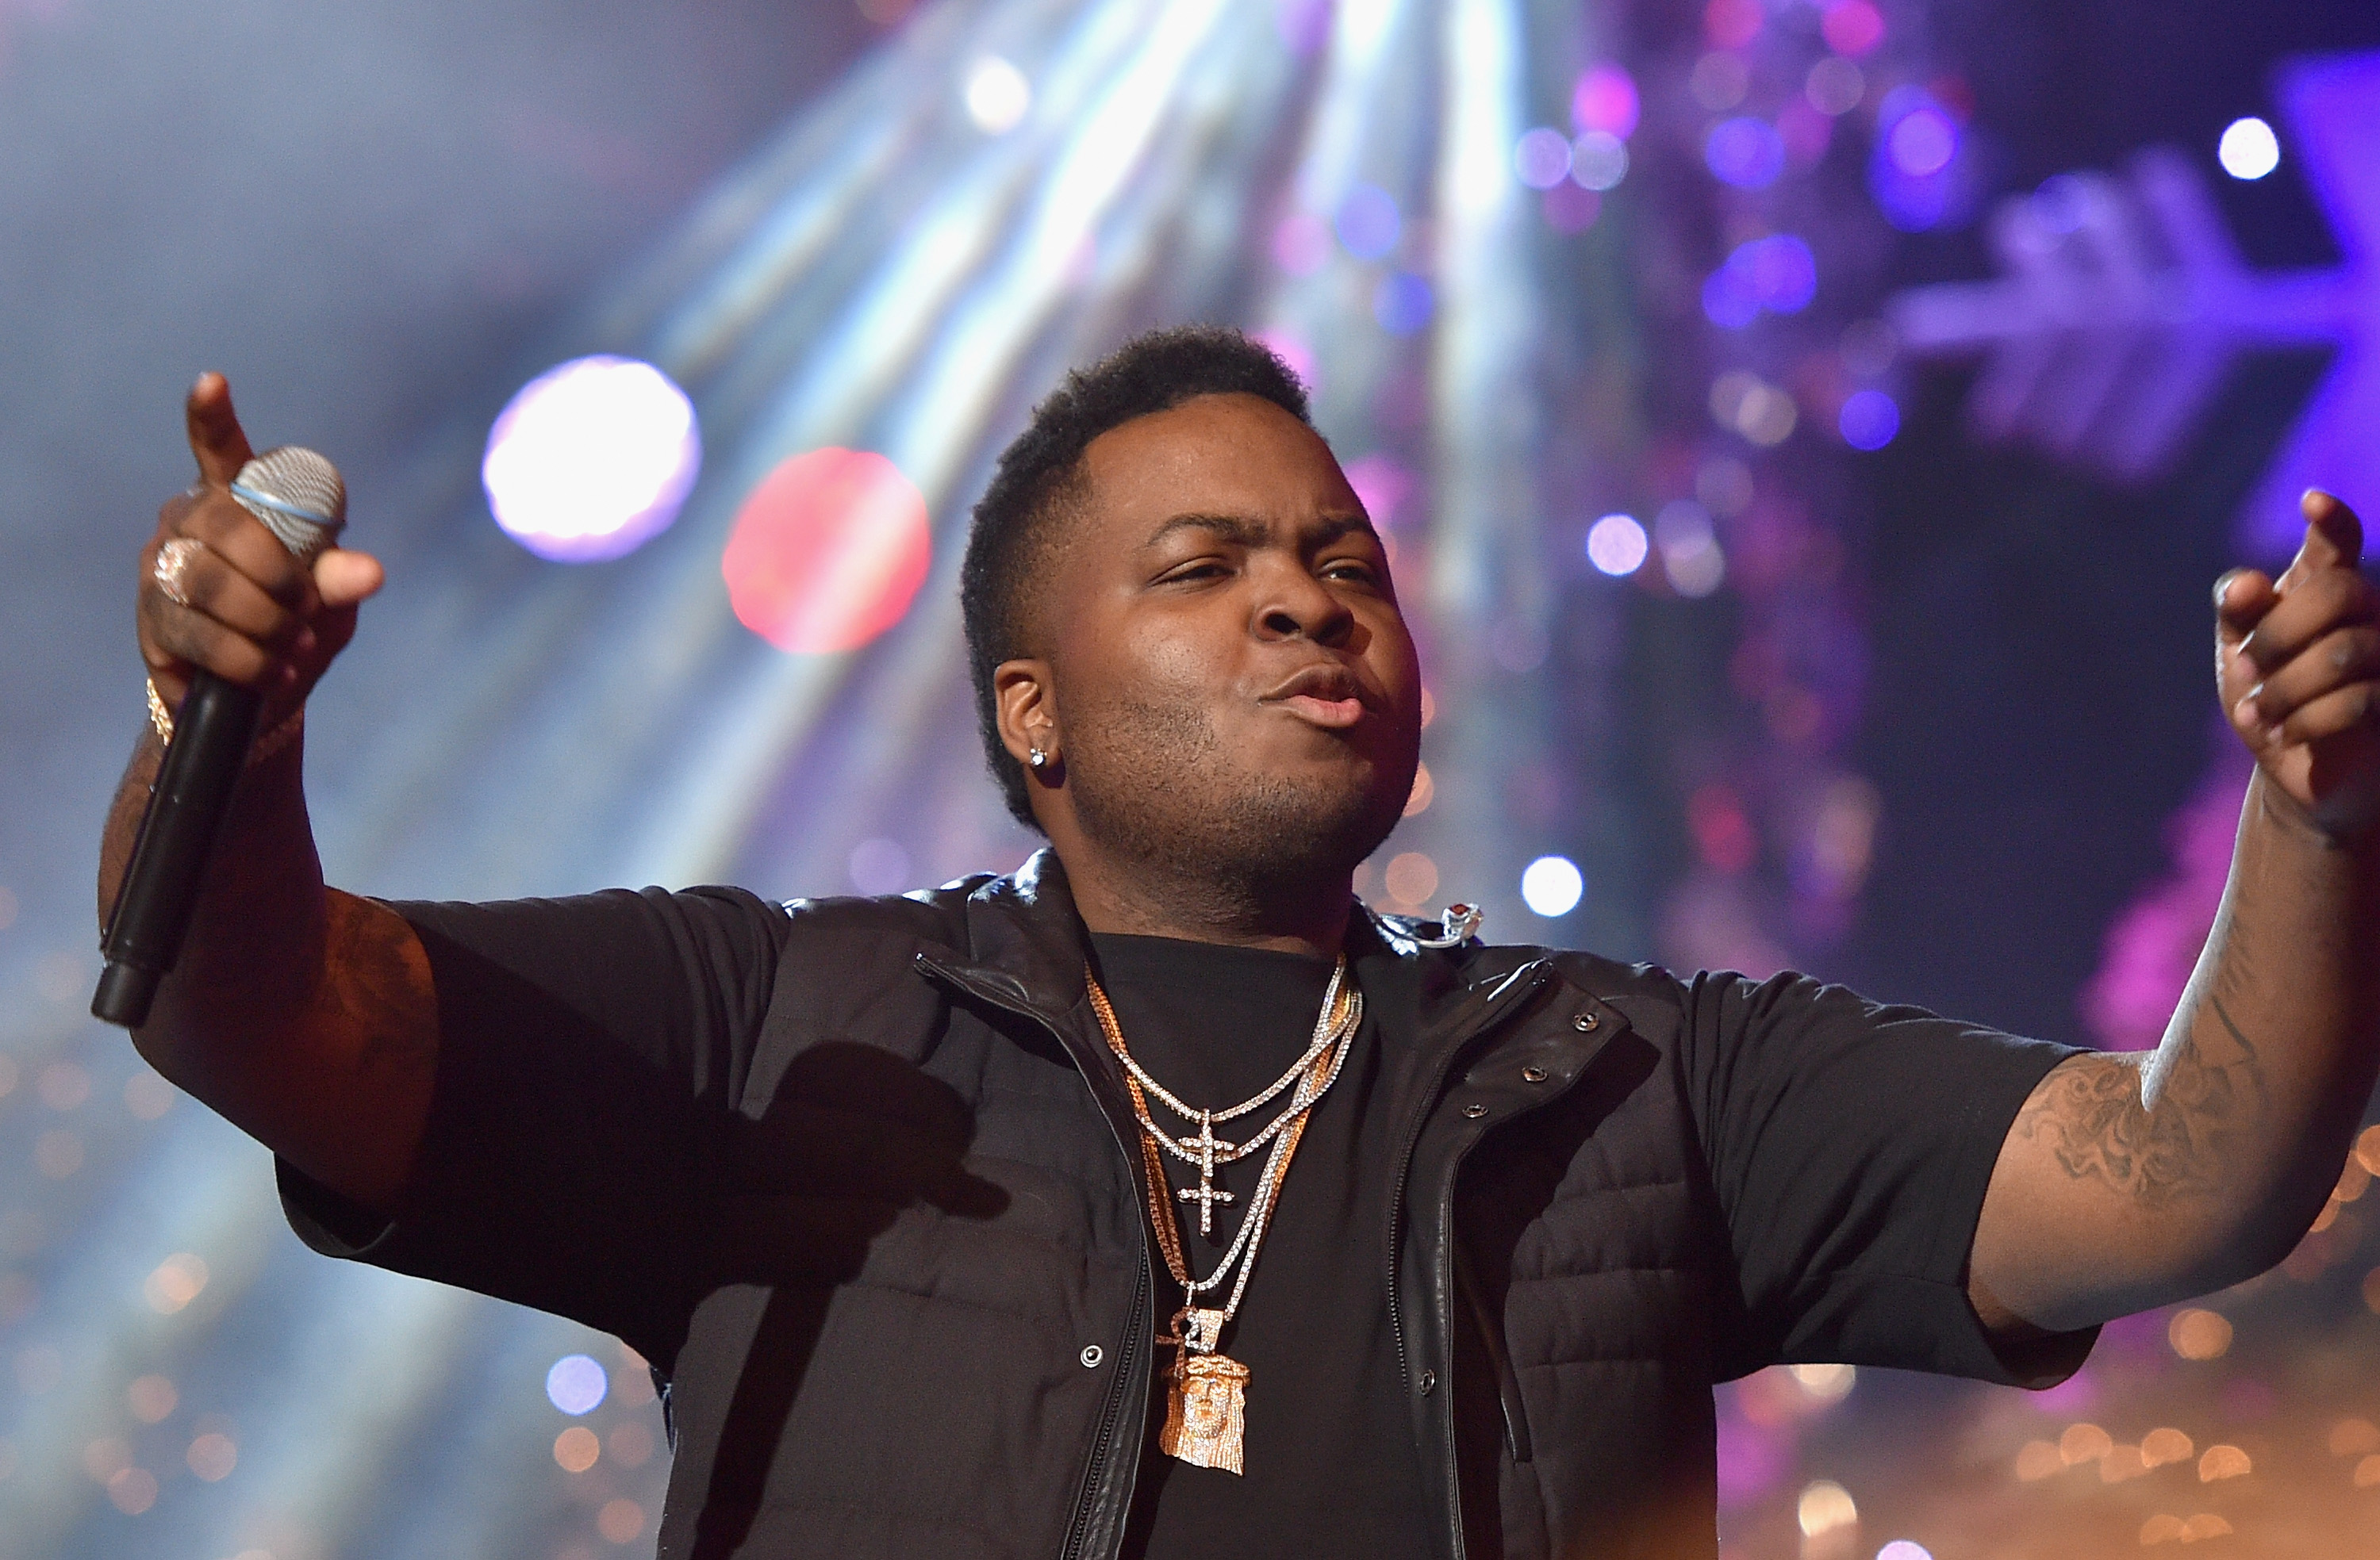 Sean Kingston performs onstage during the Hollywood Christmas Parade on November 29, 2015 in Hollywood, California. (Photo by Mike Windle/Getty)